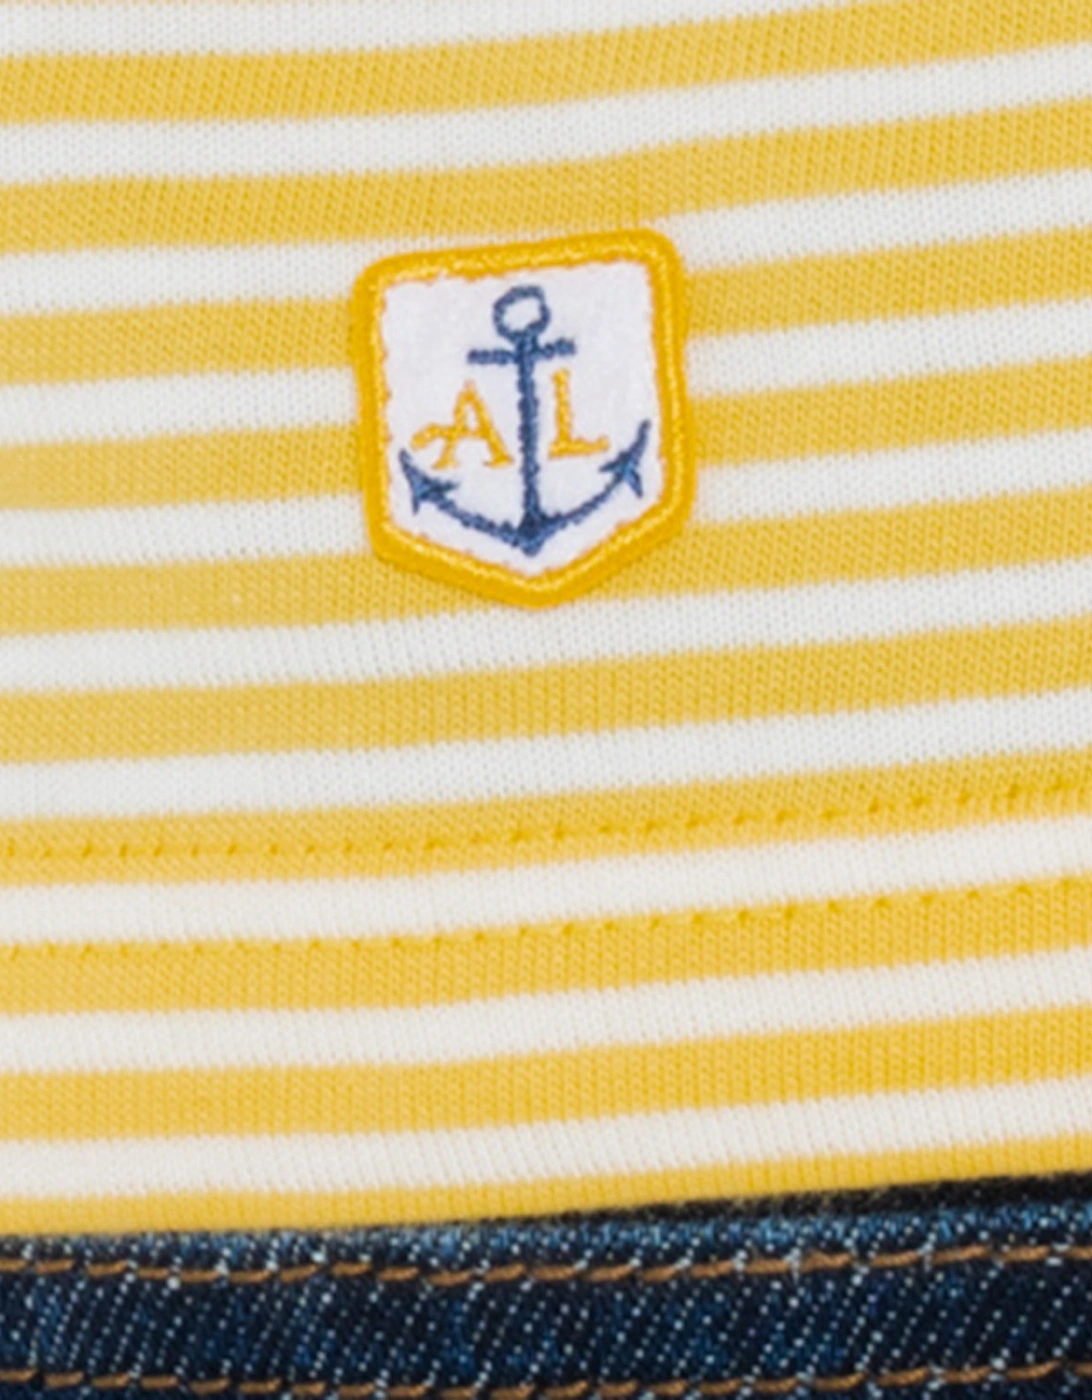 Armor Lux Mens Heritage Striped T-Shirt (Yellow)